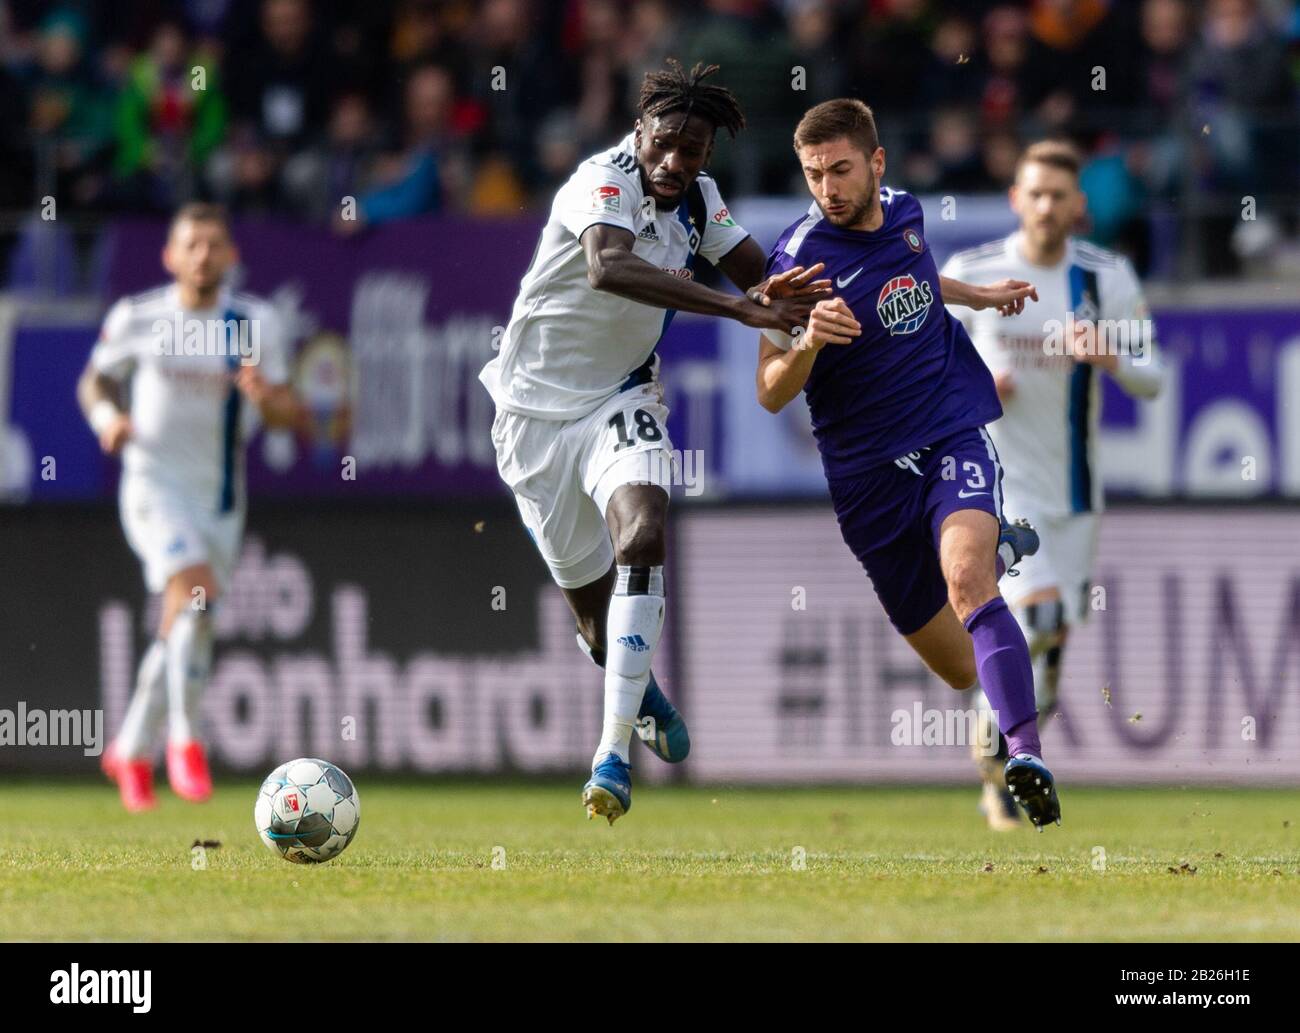 Aue, Germany. 29th Feb, 2020. Football: 2nd Bundesliga, FC Erzgebirge Aue - Hamburger SV, 24th matchday, at the Sparkassen-Erzgebirgsstadion. Aues Marko Mihojevic (r) against Hamburg's Bakery Jatta. Credit: Robert Michael/dpa-Zentralbild/dpa - IMPORTANT NOTE: In accordance with the regulations of the DFL Deutsche Fußball Liga and the DFB Deutscher Fußball-Bund, it is prohibited to exploit or have exploited in the stadium and/or from the game taken photographs in the form of sequence images and/or video-like photo series./dpa/Alamy Live News Stock Photo